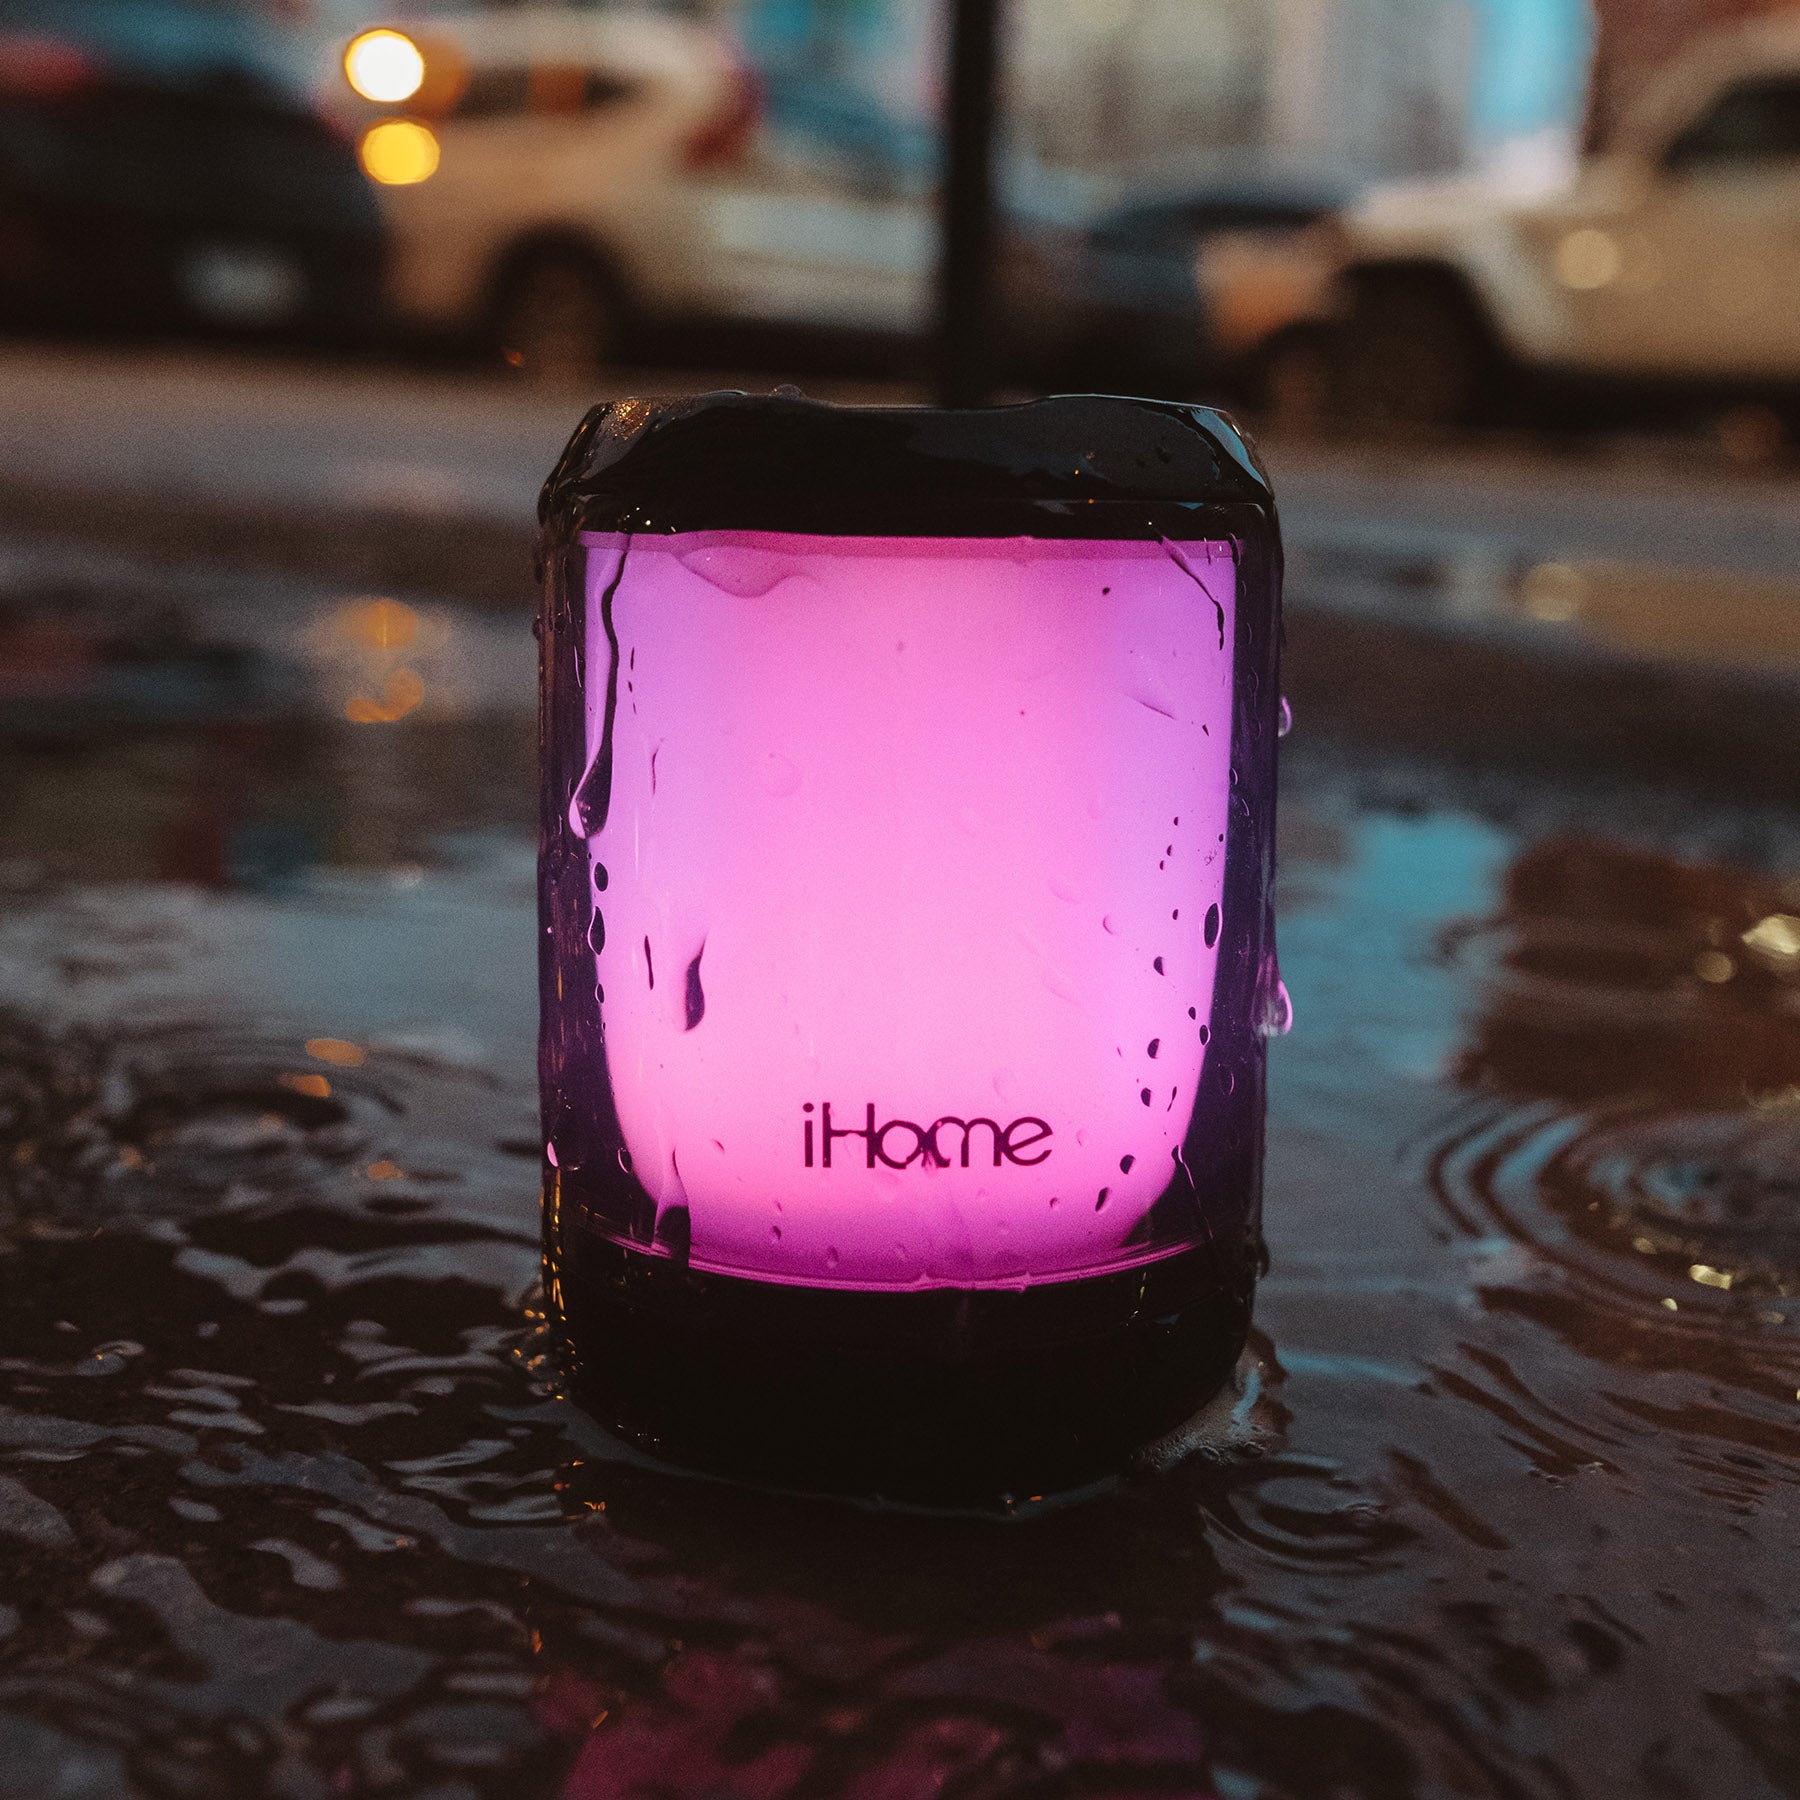 Waterproof Bluetooth Speaker with Color Changing Lights, Portable and Rechargeable (iBT800BOL)